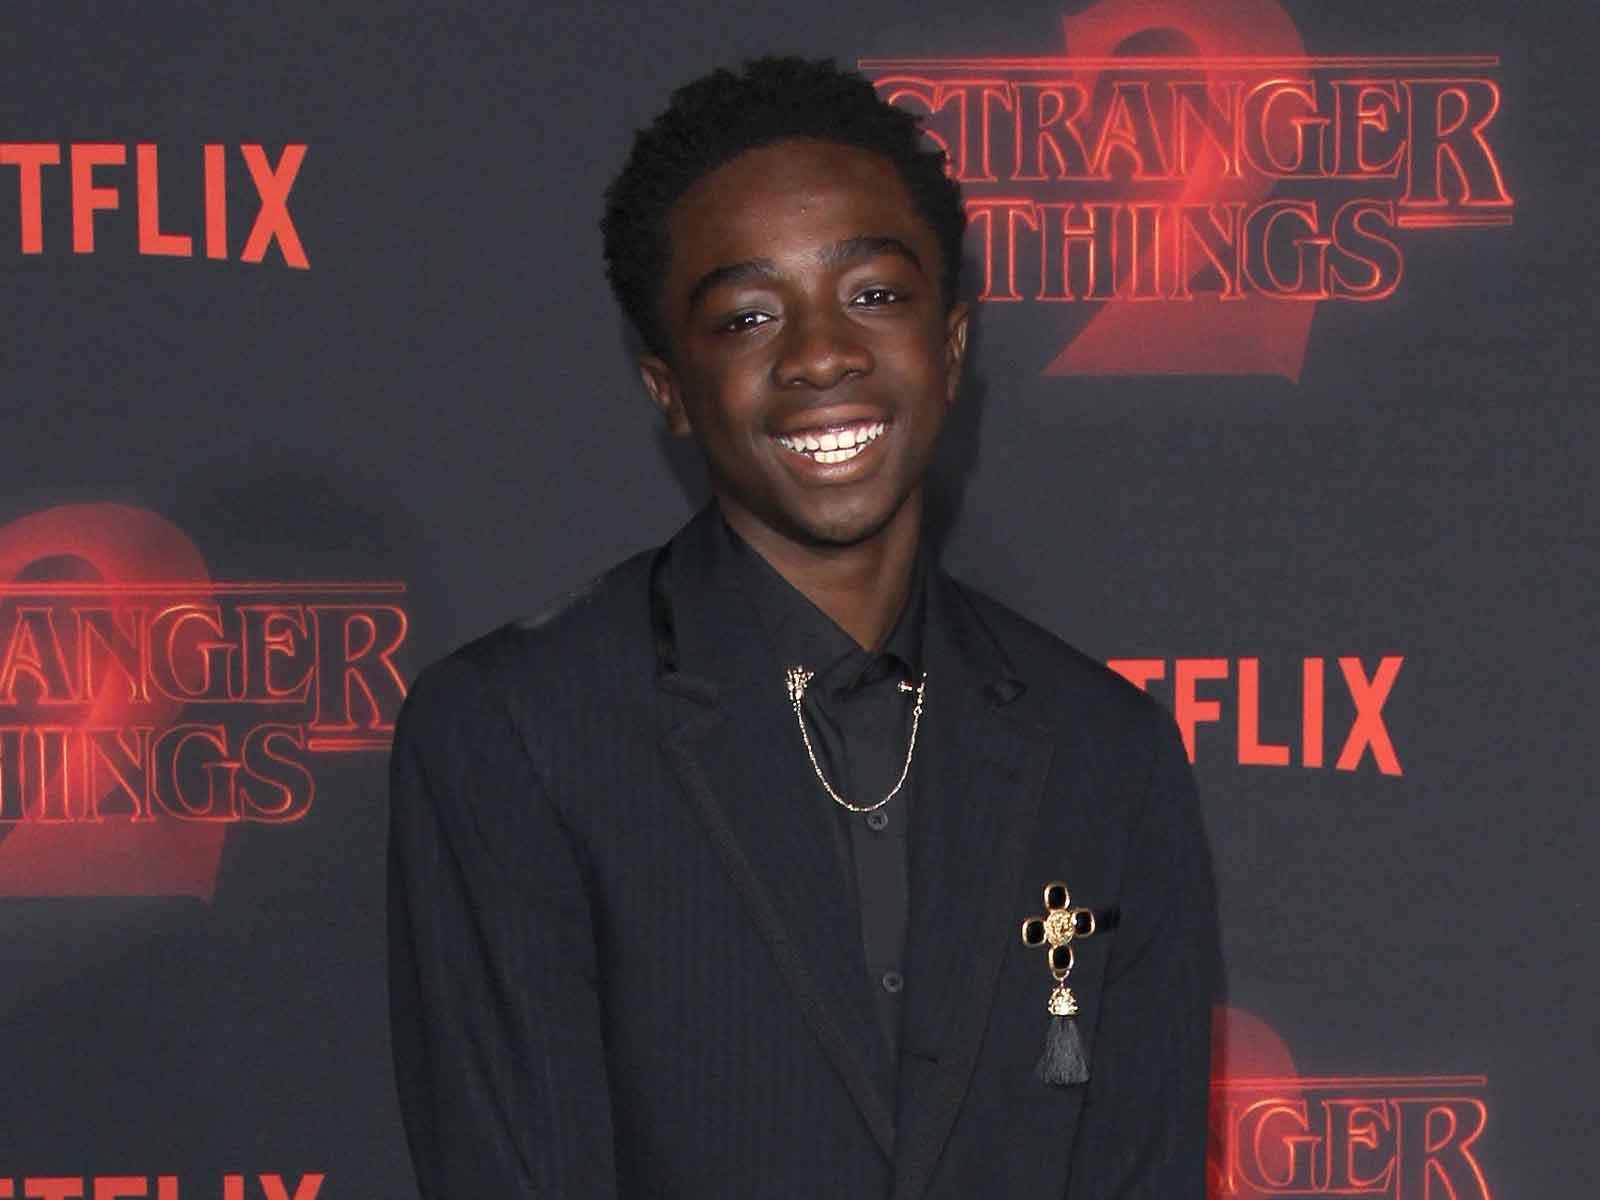 ‘Stranger Things’ Caleb McLaughlin’s Contract Shows He Only Made $1,000 More Per Ep for Season 2